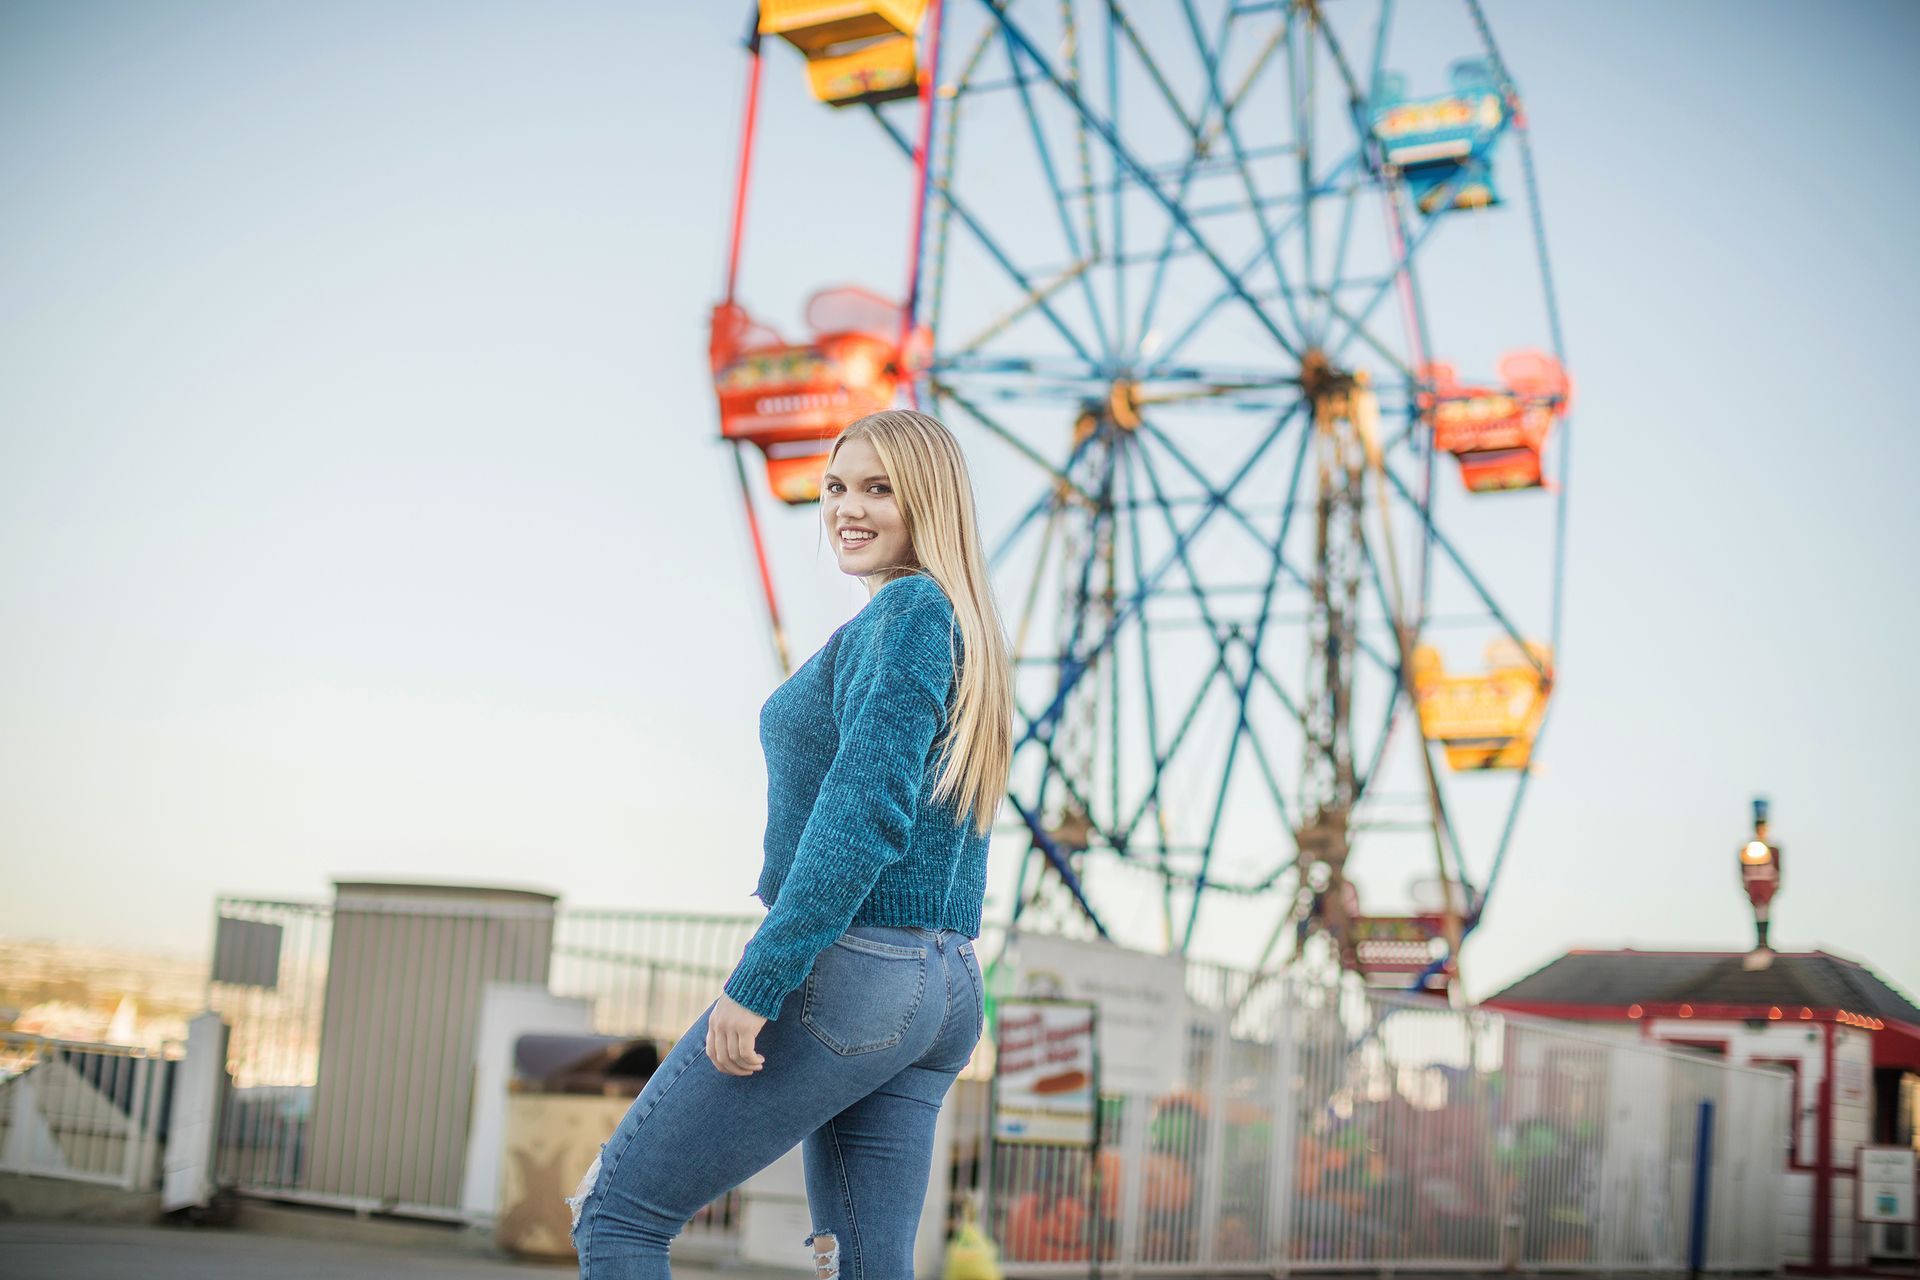 HIgh School senior photography session in Balboa in front of the ferris wheel.